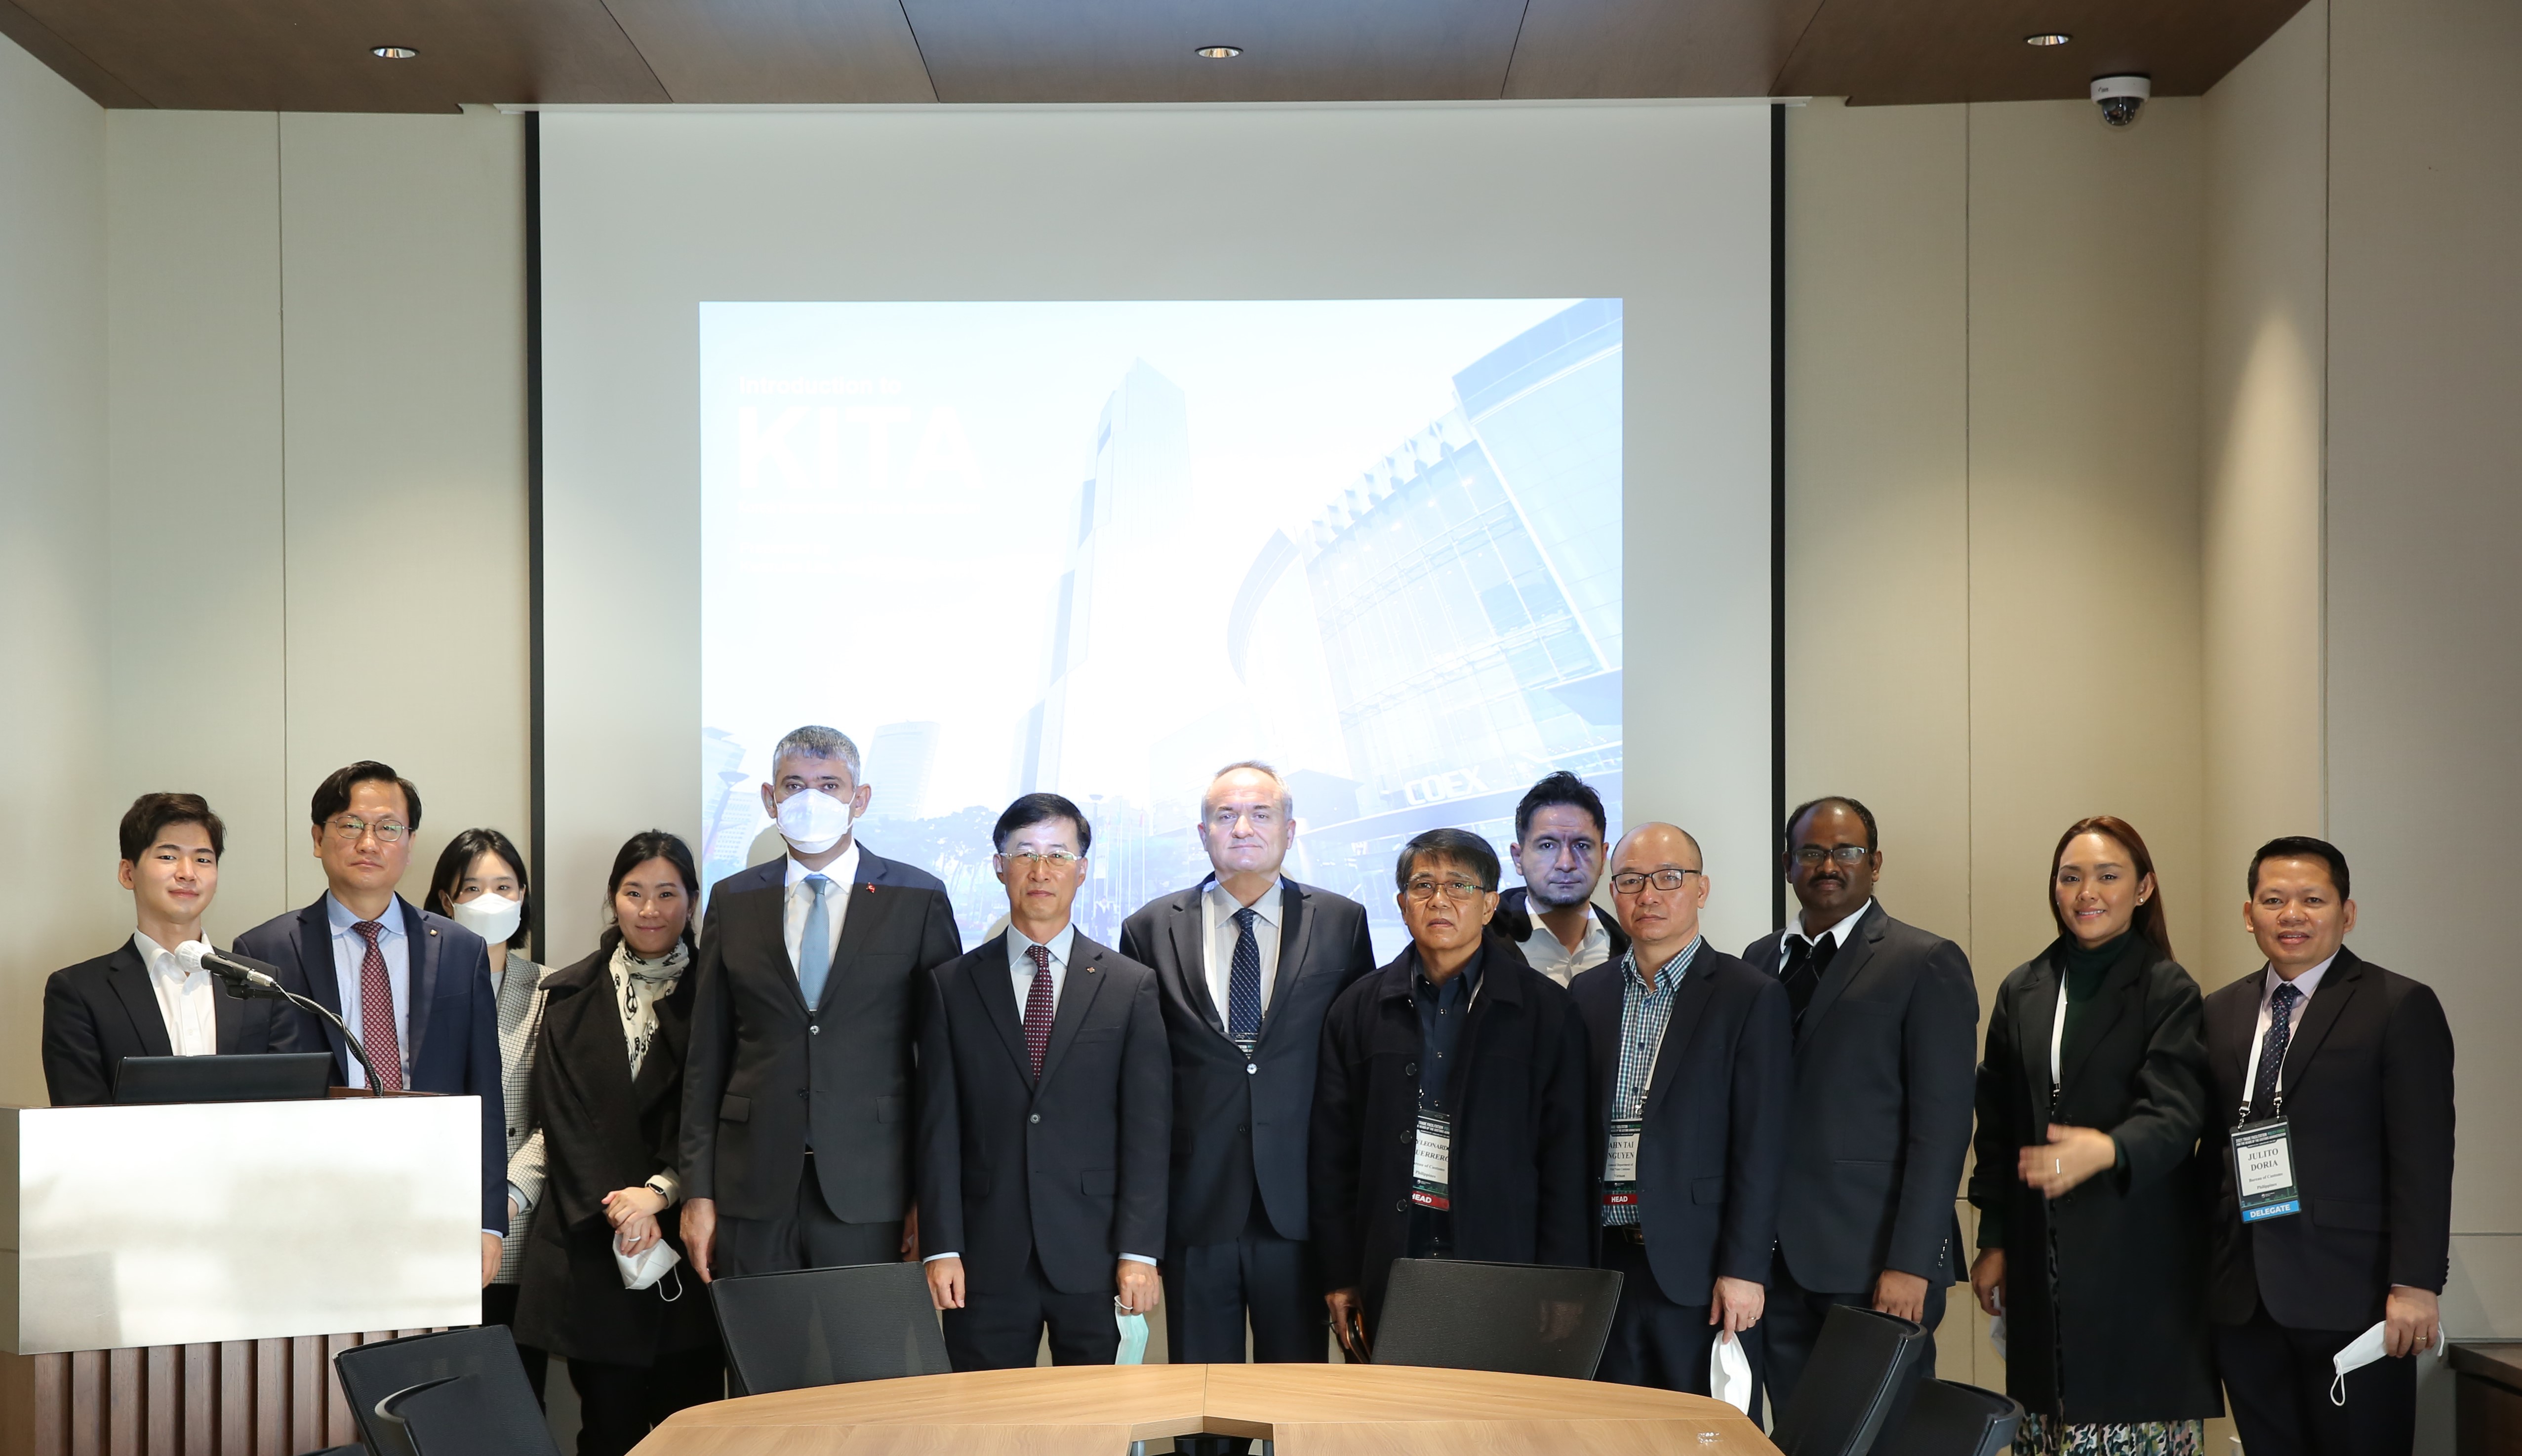 High-level customs officials from 4 countries participate in a trade sector field trip